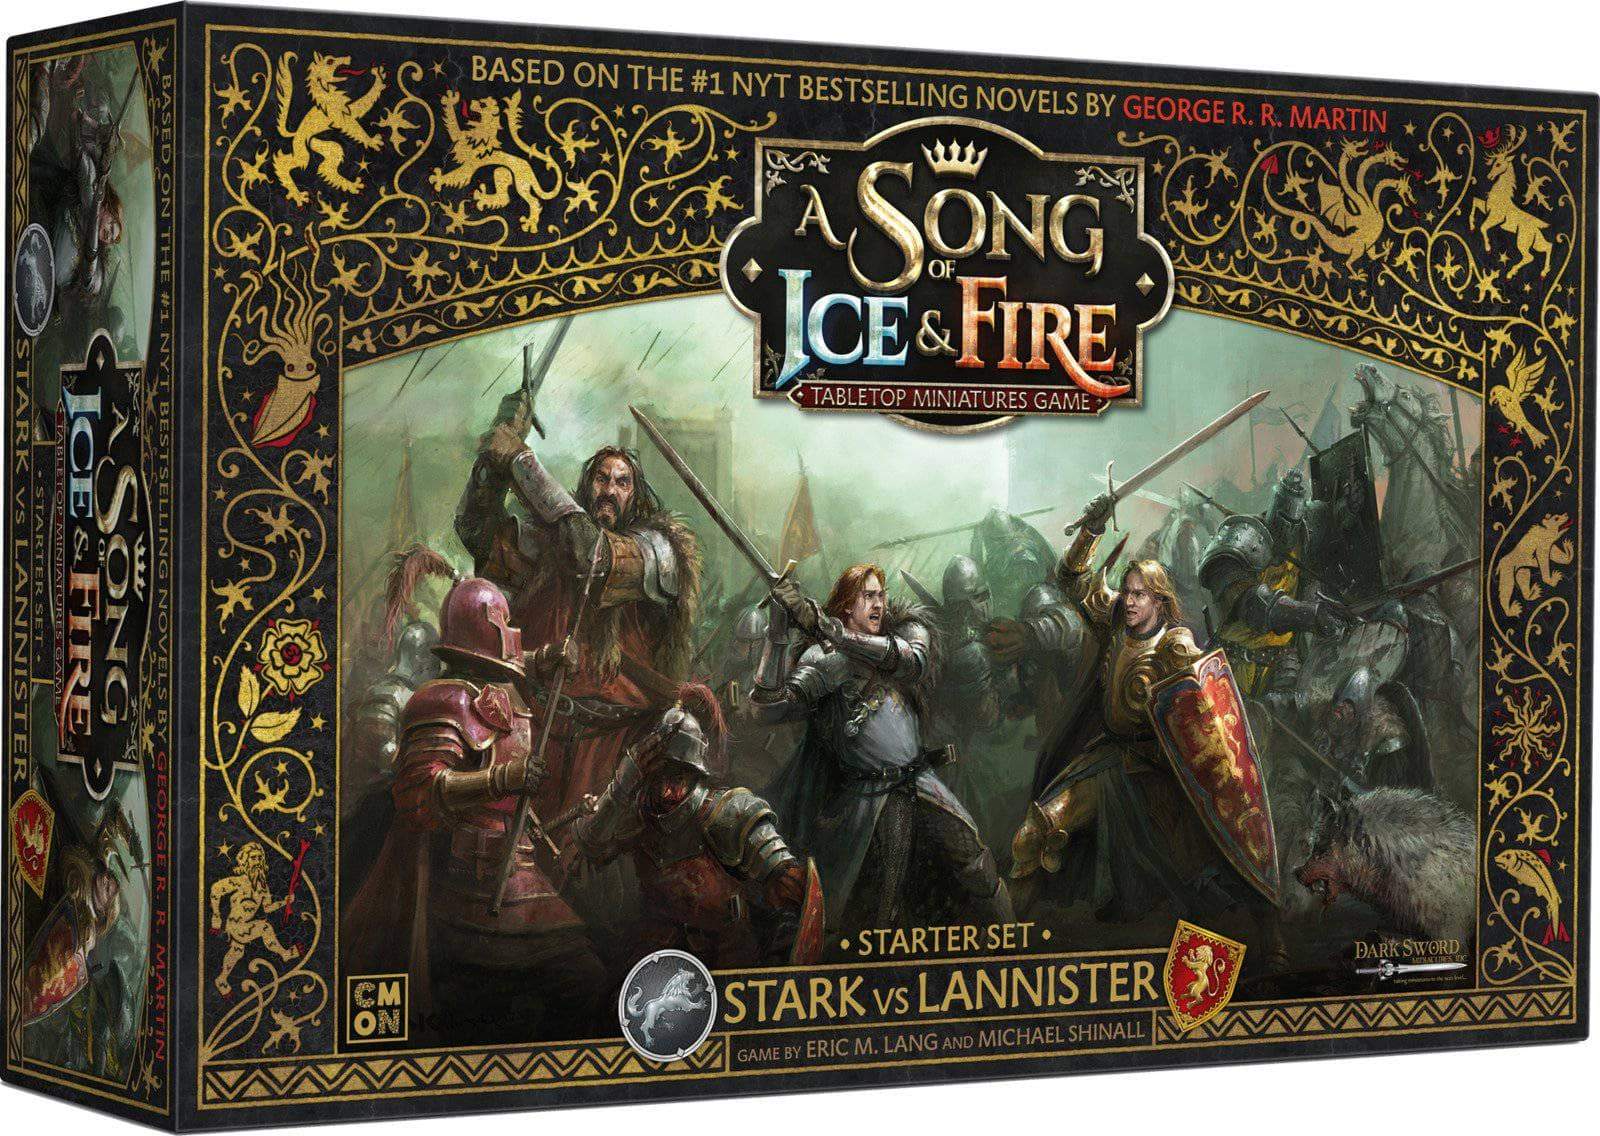 A Song of Ice & Fire: TMG Starter Set Stark vs Lannister (Retail Edition)